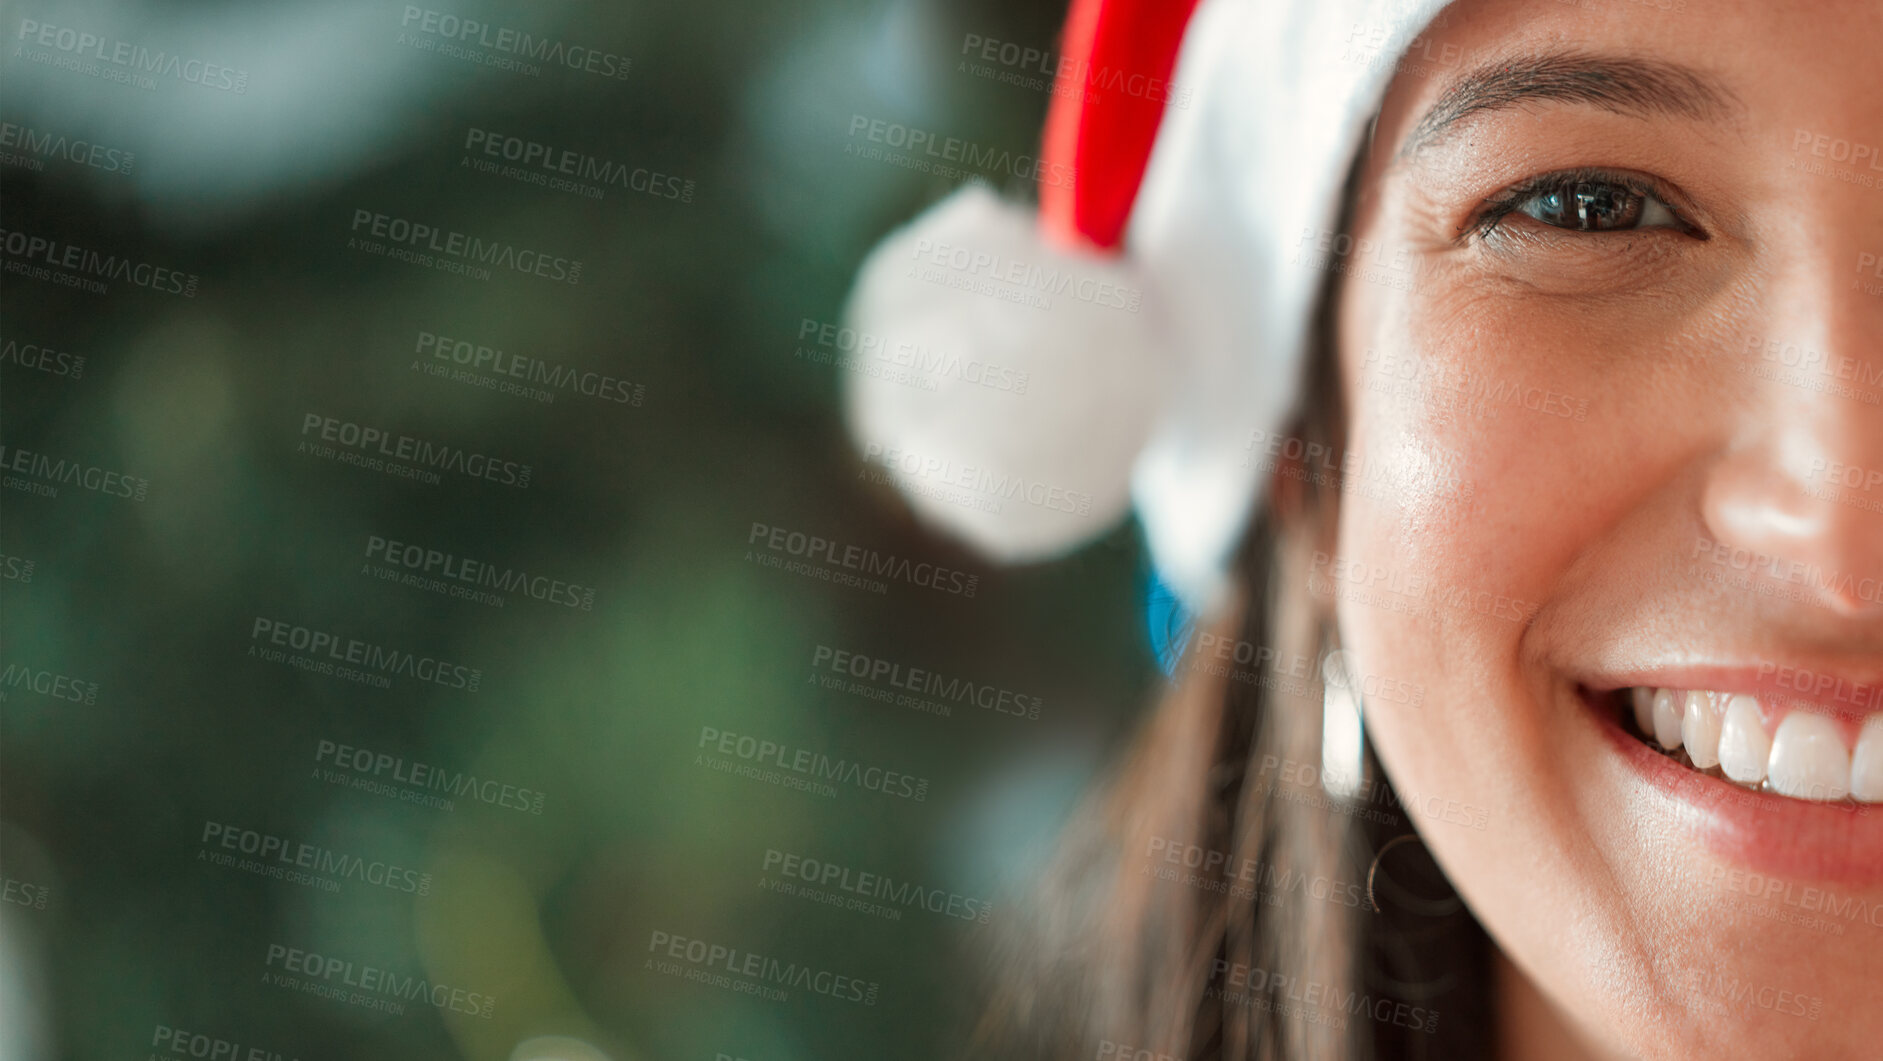 Buy stock photo Shot of a young woman celebrating Christmas at home